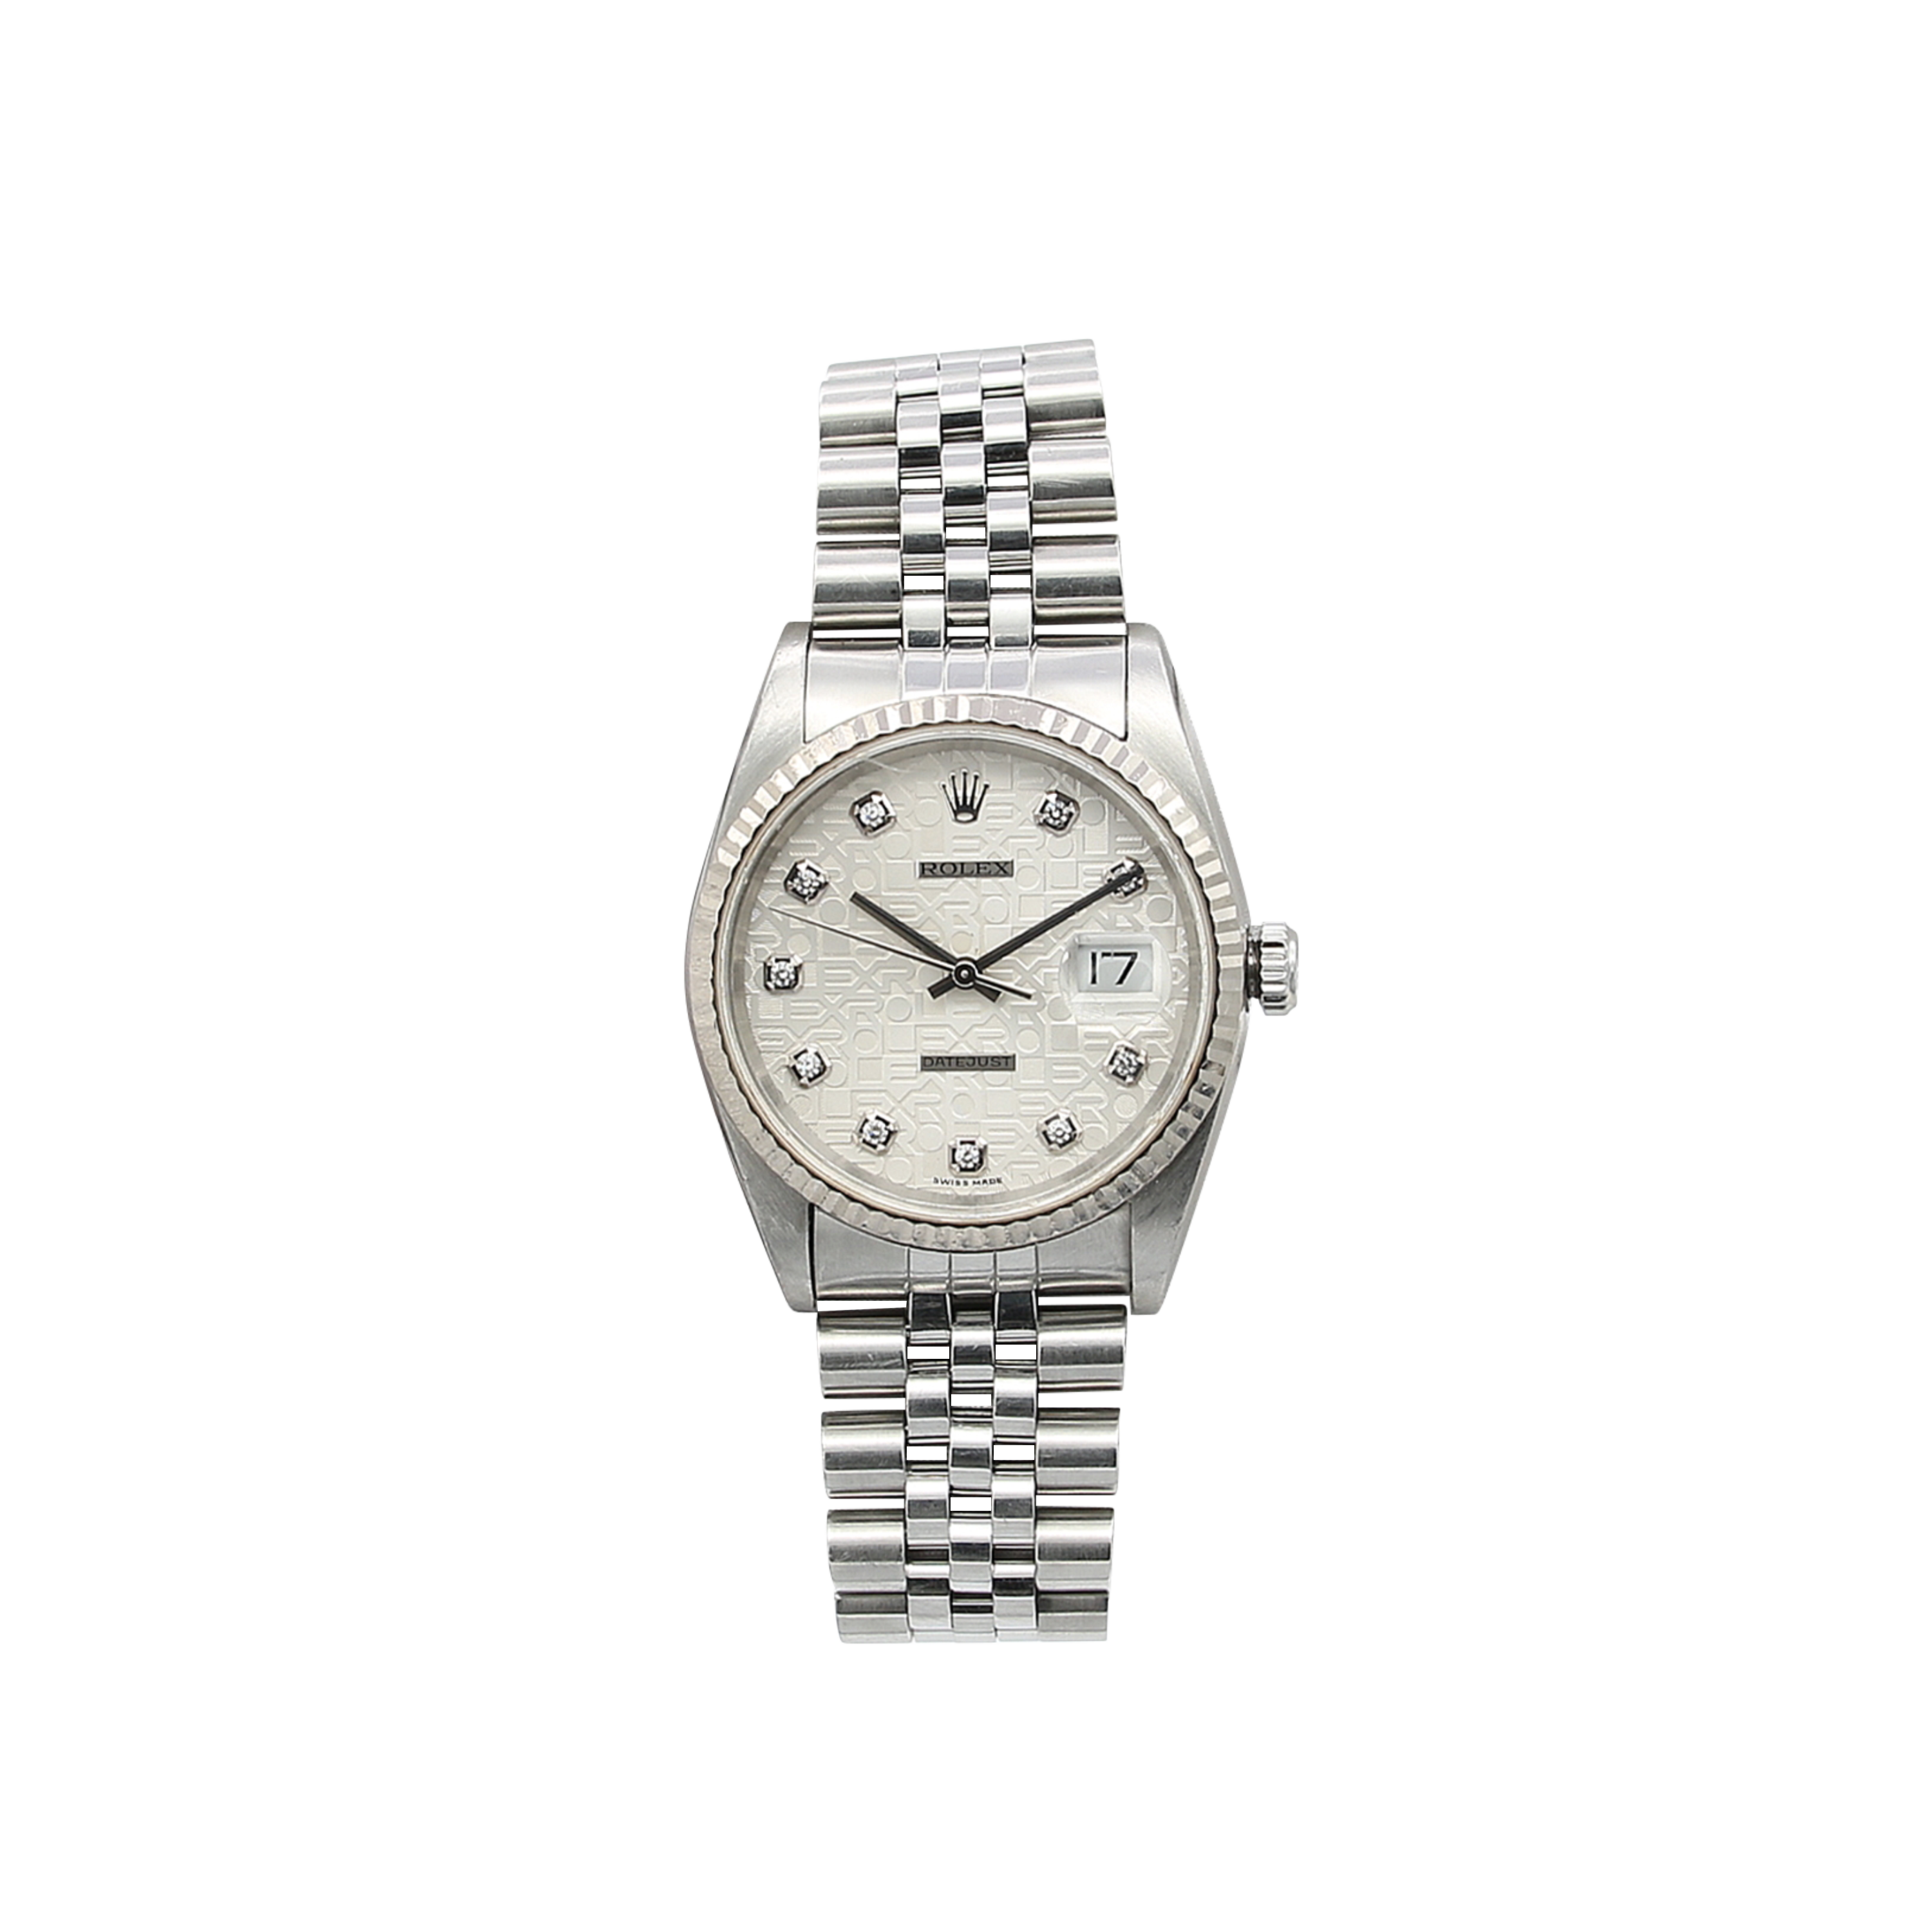 Rolex Datejust 36 ref. 16234 Computer Dial with Diamonds - With Papers